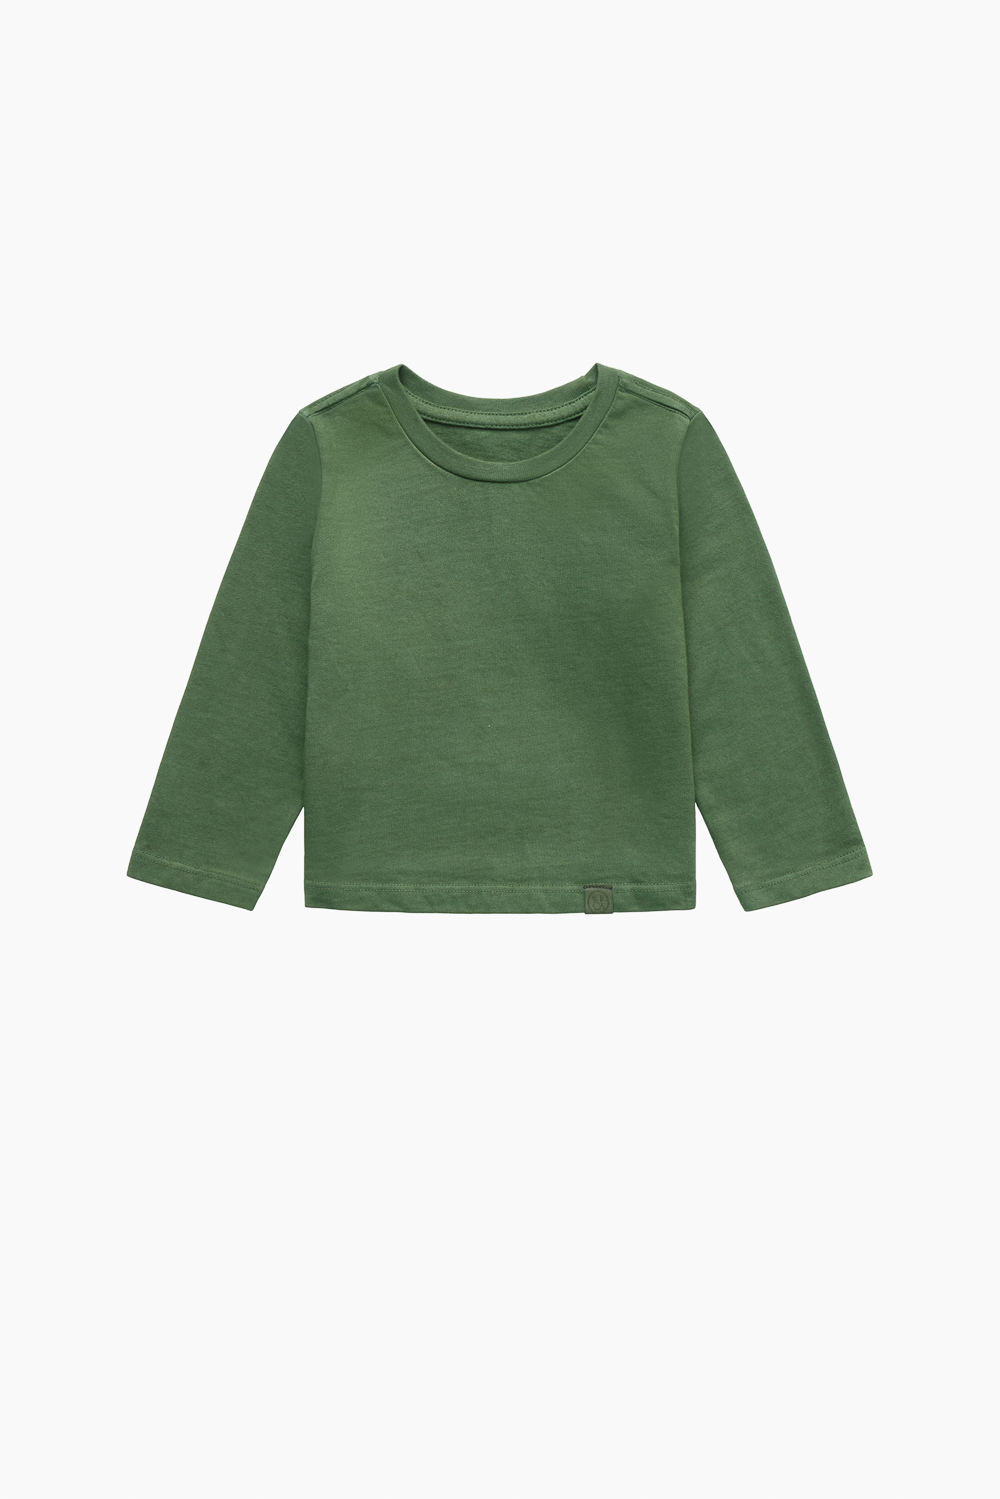 HEAVY COTTON KIDS LONG SLEEVE - ROSEMARY Featured Image